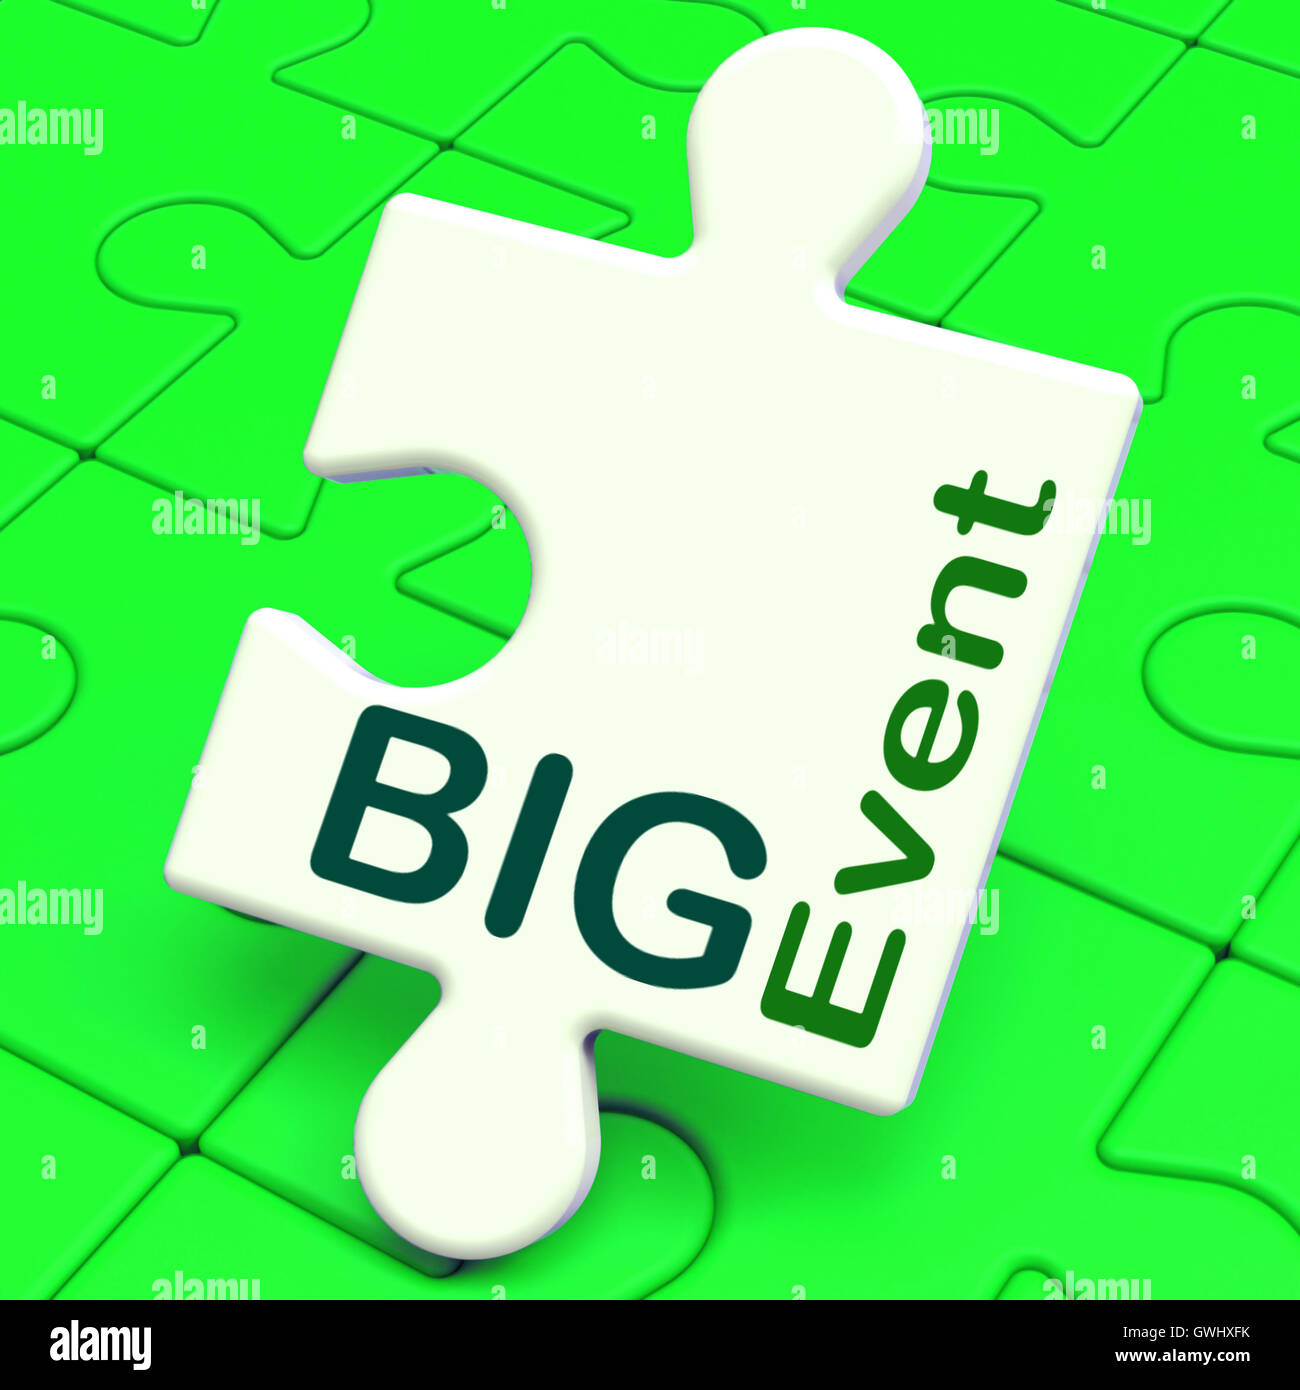 Big Event Puzzle Shows Celebration Occasion And Performance Stock Photo